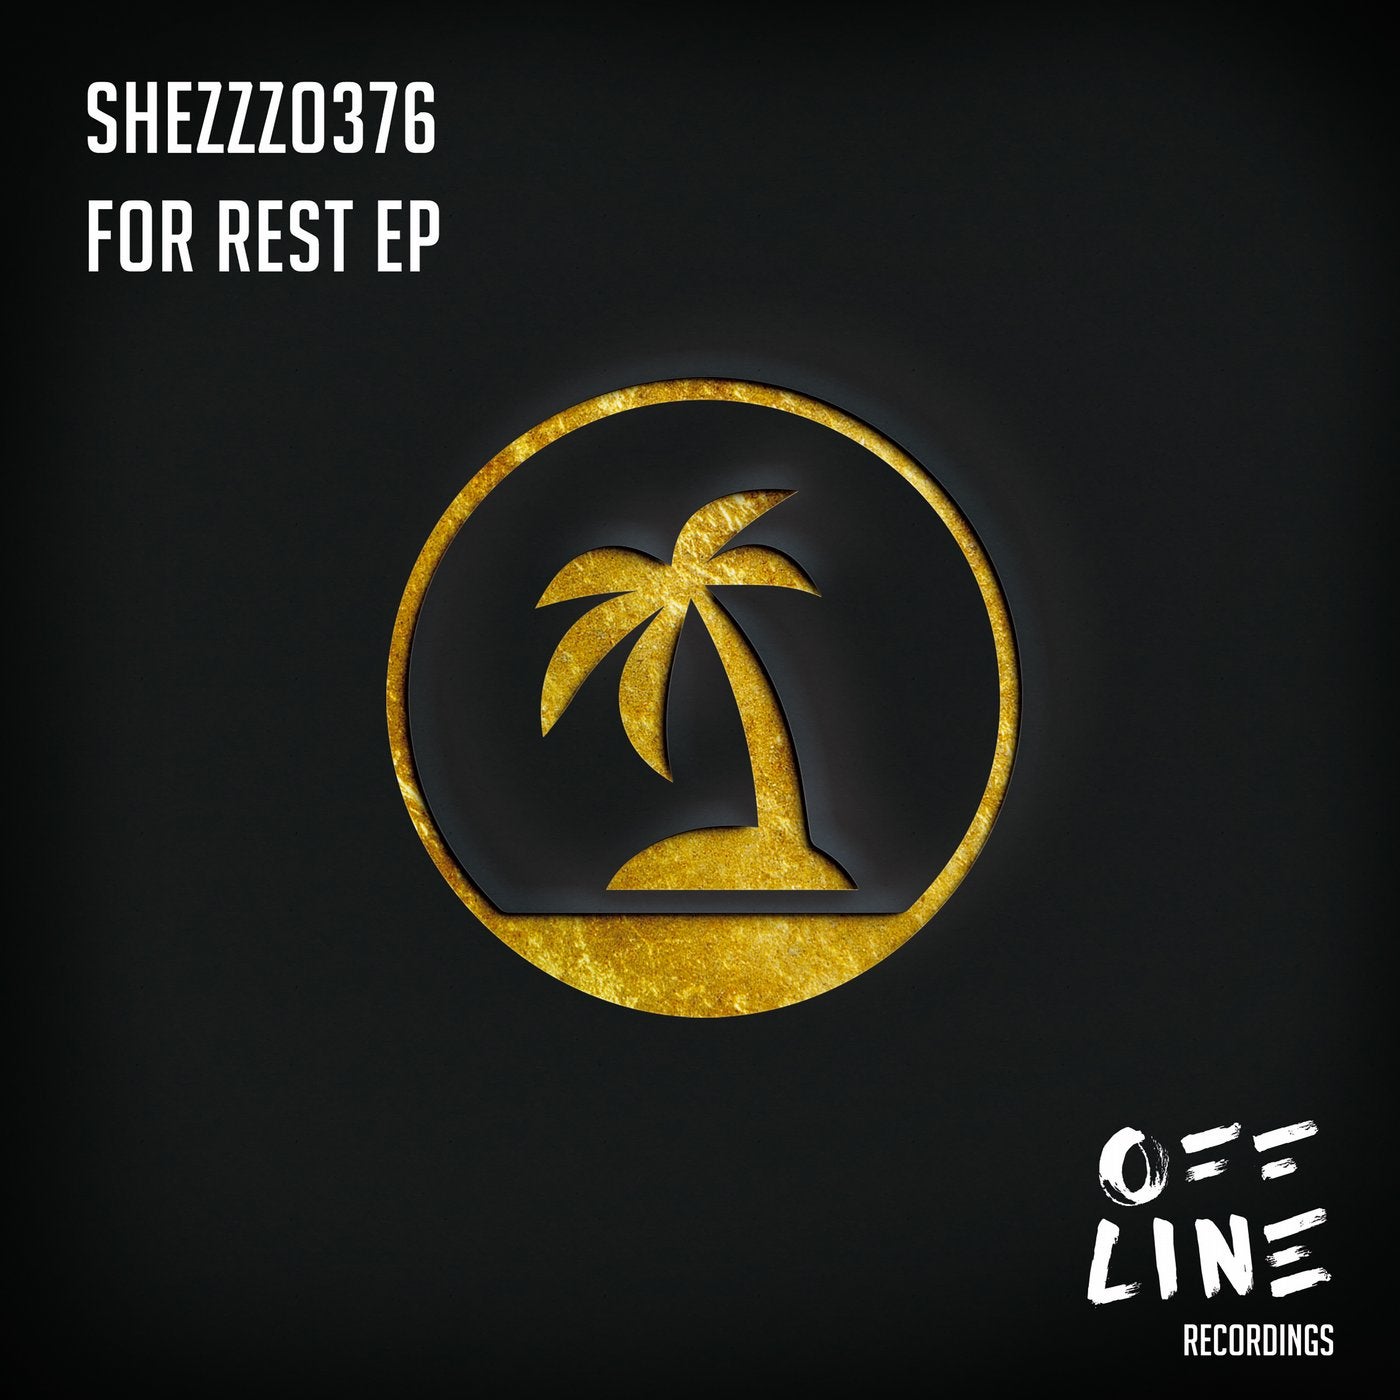 For Rest EP